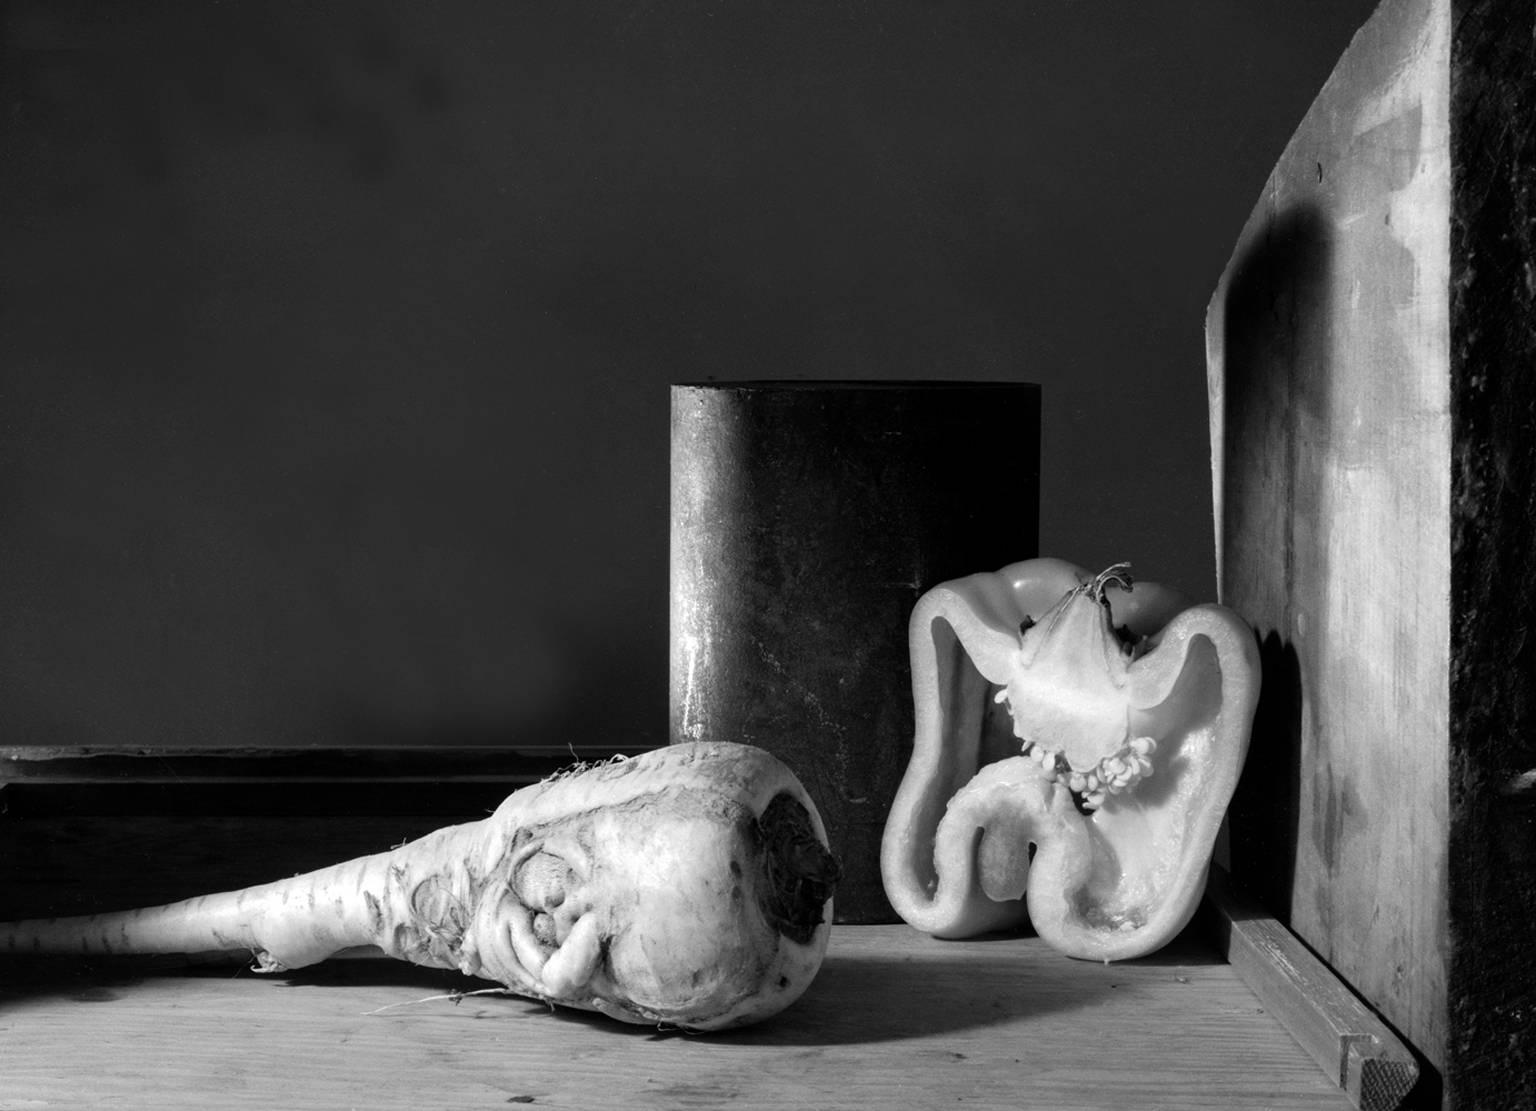 Howard Nathenson Black and White Photograph - "Parsnip and Half Pepper", digital black and white still life photograph